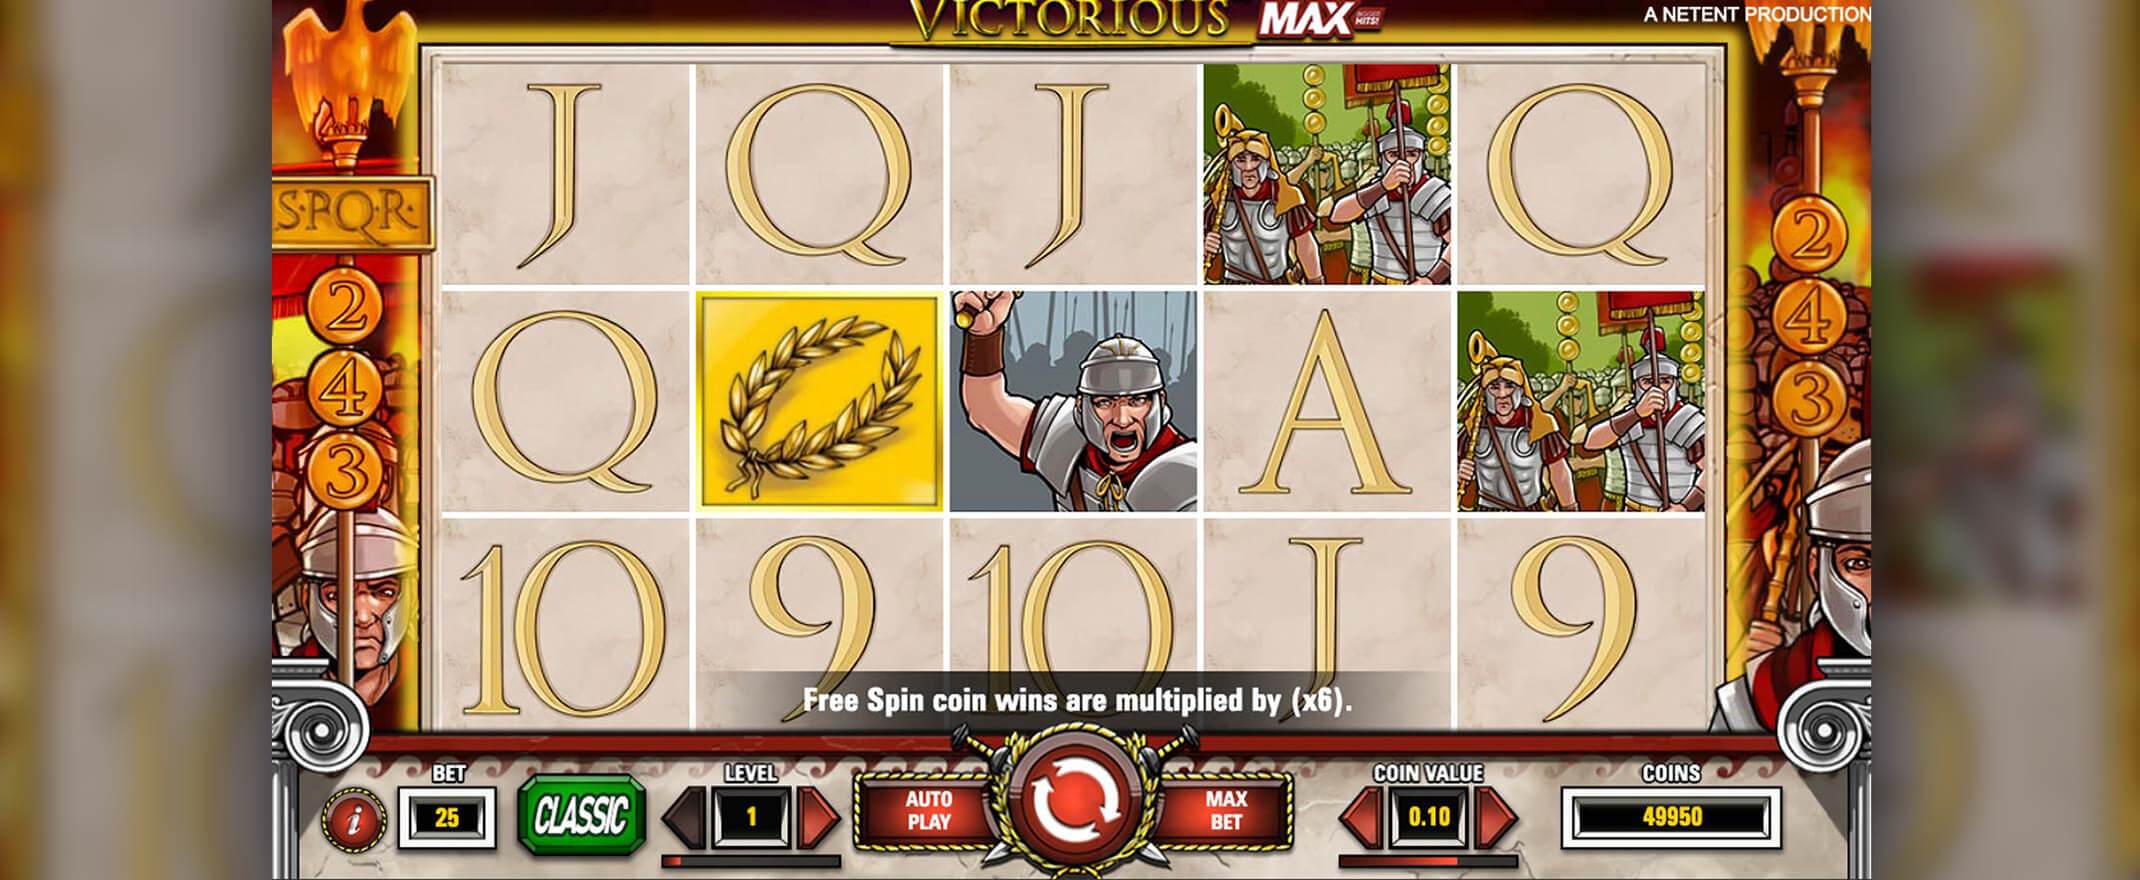 Victorious MAX video slot by NetEnt